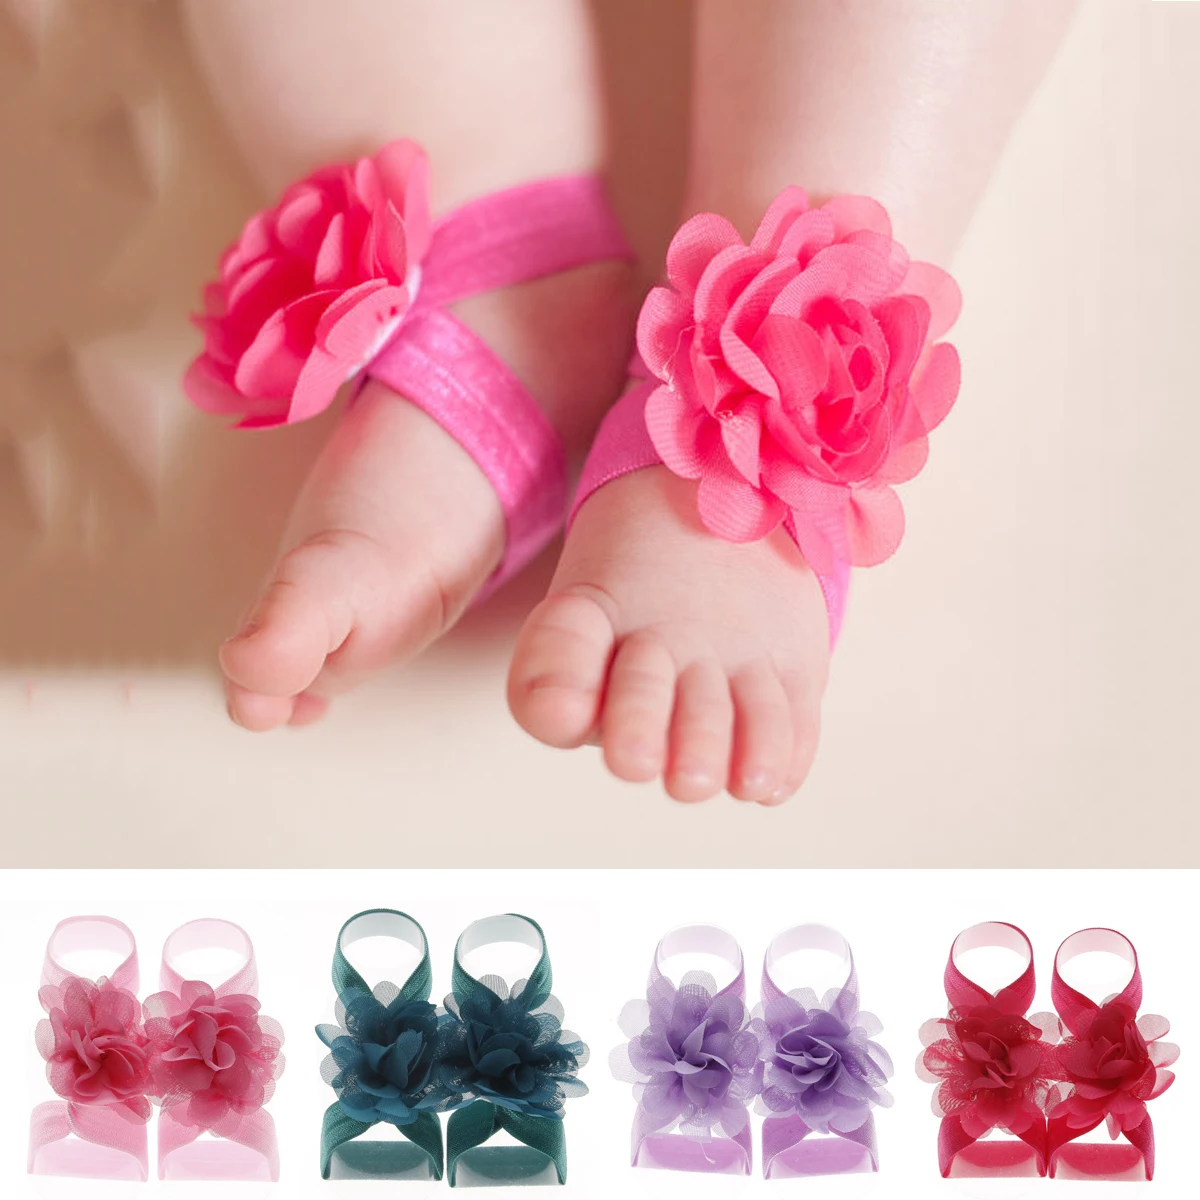 Details about   15 Pairs Baby Girl Kids Barefoot Sandals Flowers Shoes Headband For Photography 